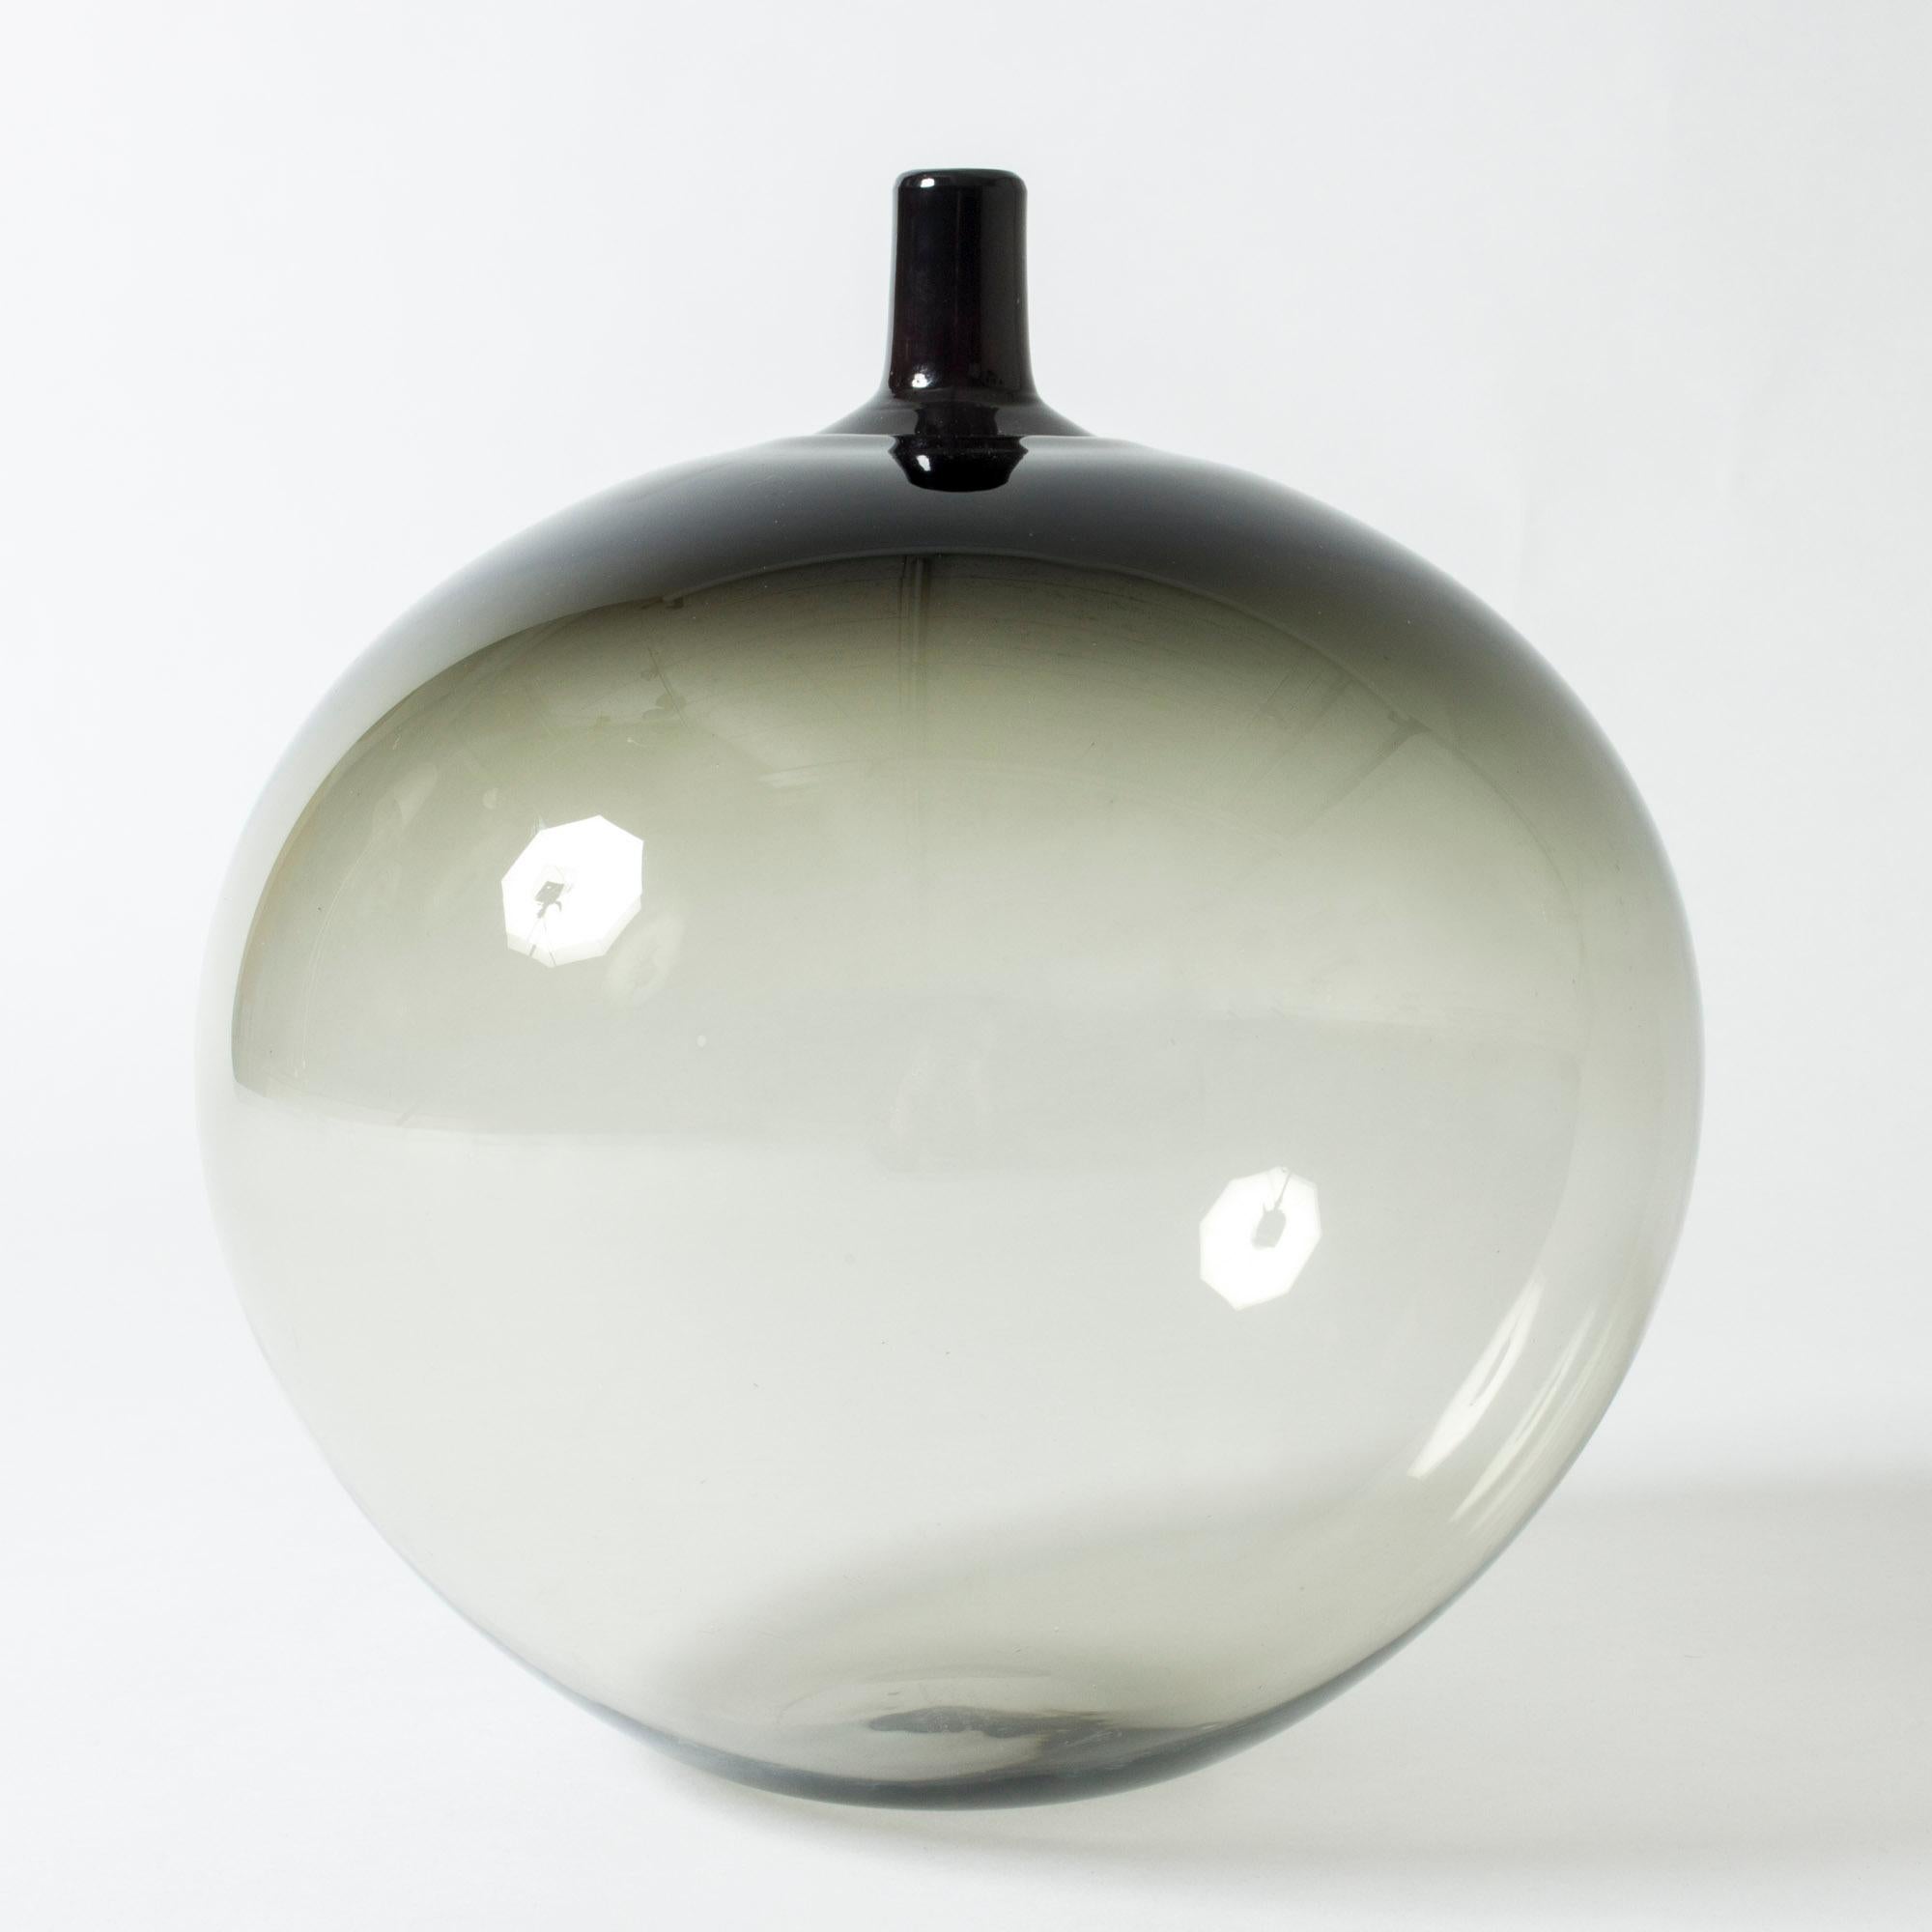 Stunning crystal glass apple by Ingeborg Lundin, tinted grey, black at the top. The apple is an iconic piece, composed in 1955 and was first presented at H55 where it caused a sensation. The design is the epitome of Lundin’s pure, gracious